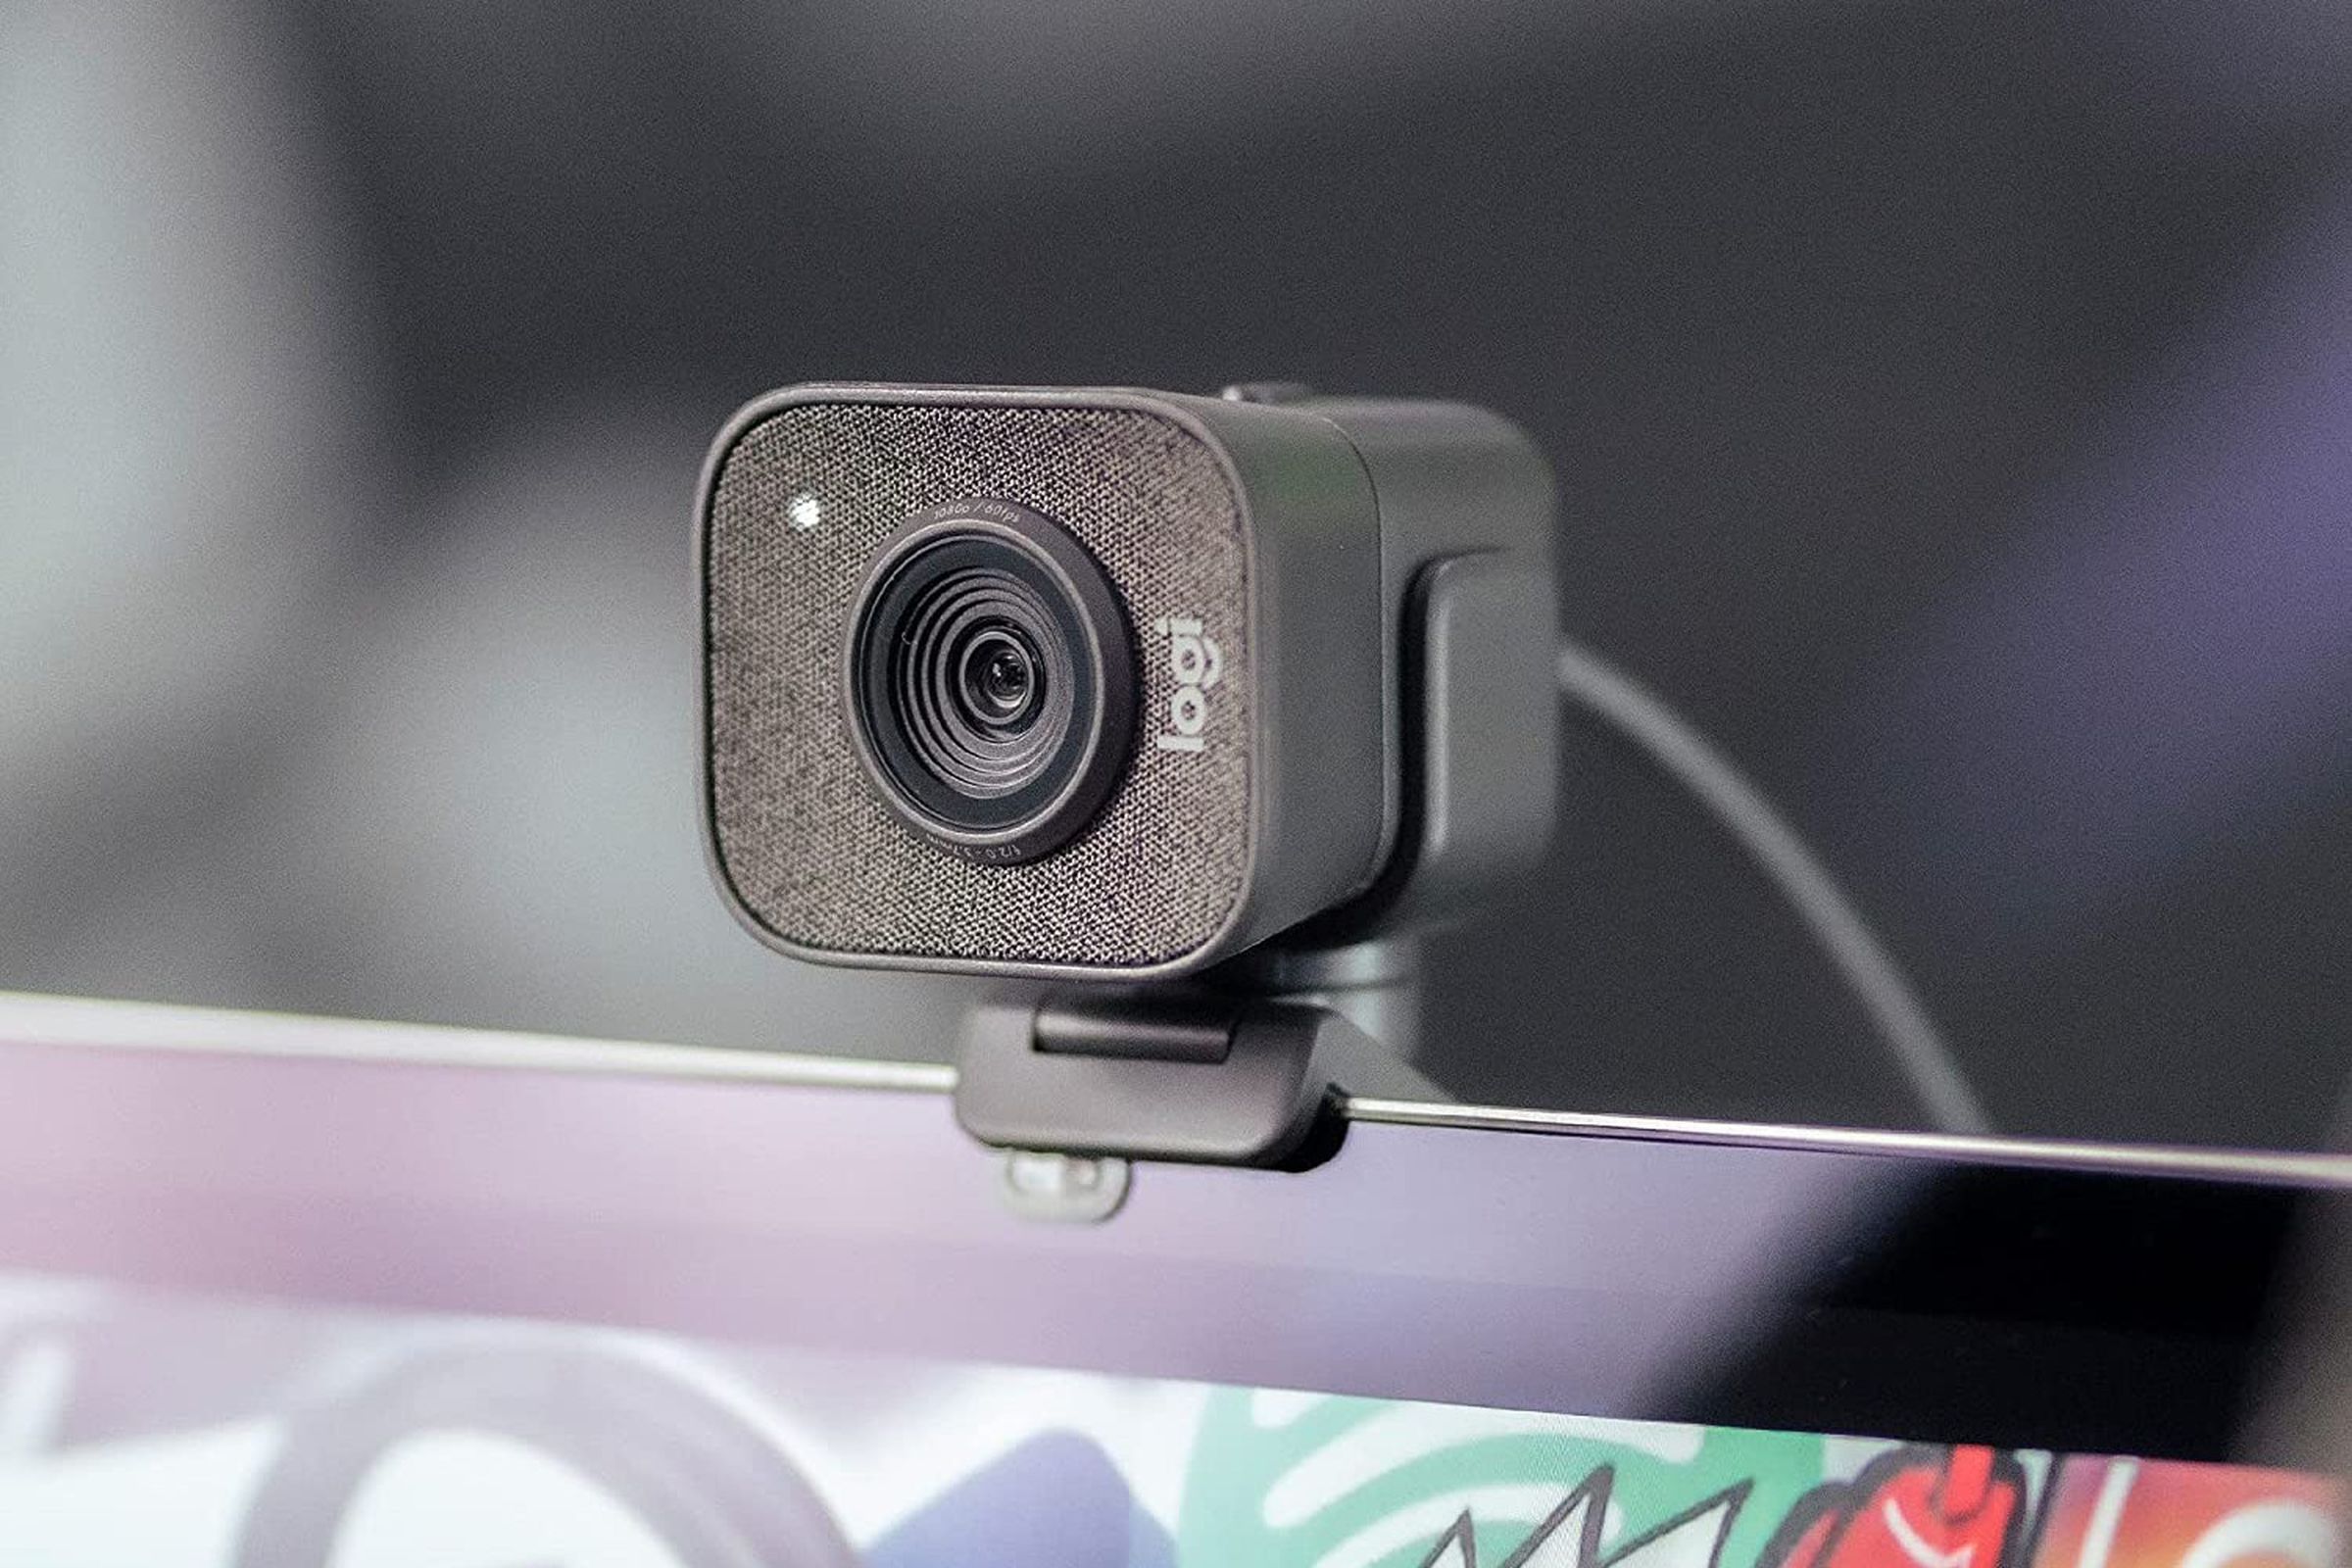 Logitech’s Streamcam webcam perched on top of a monitor.